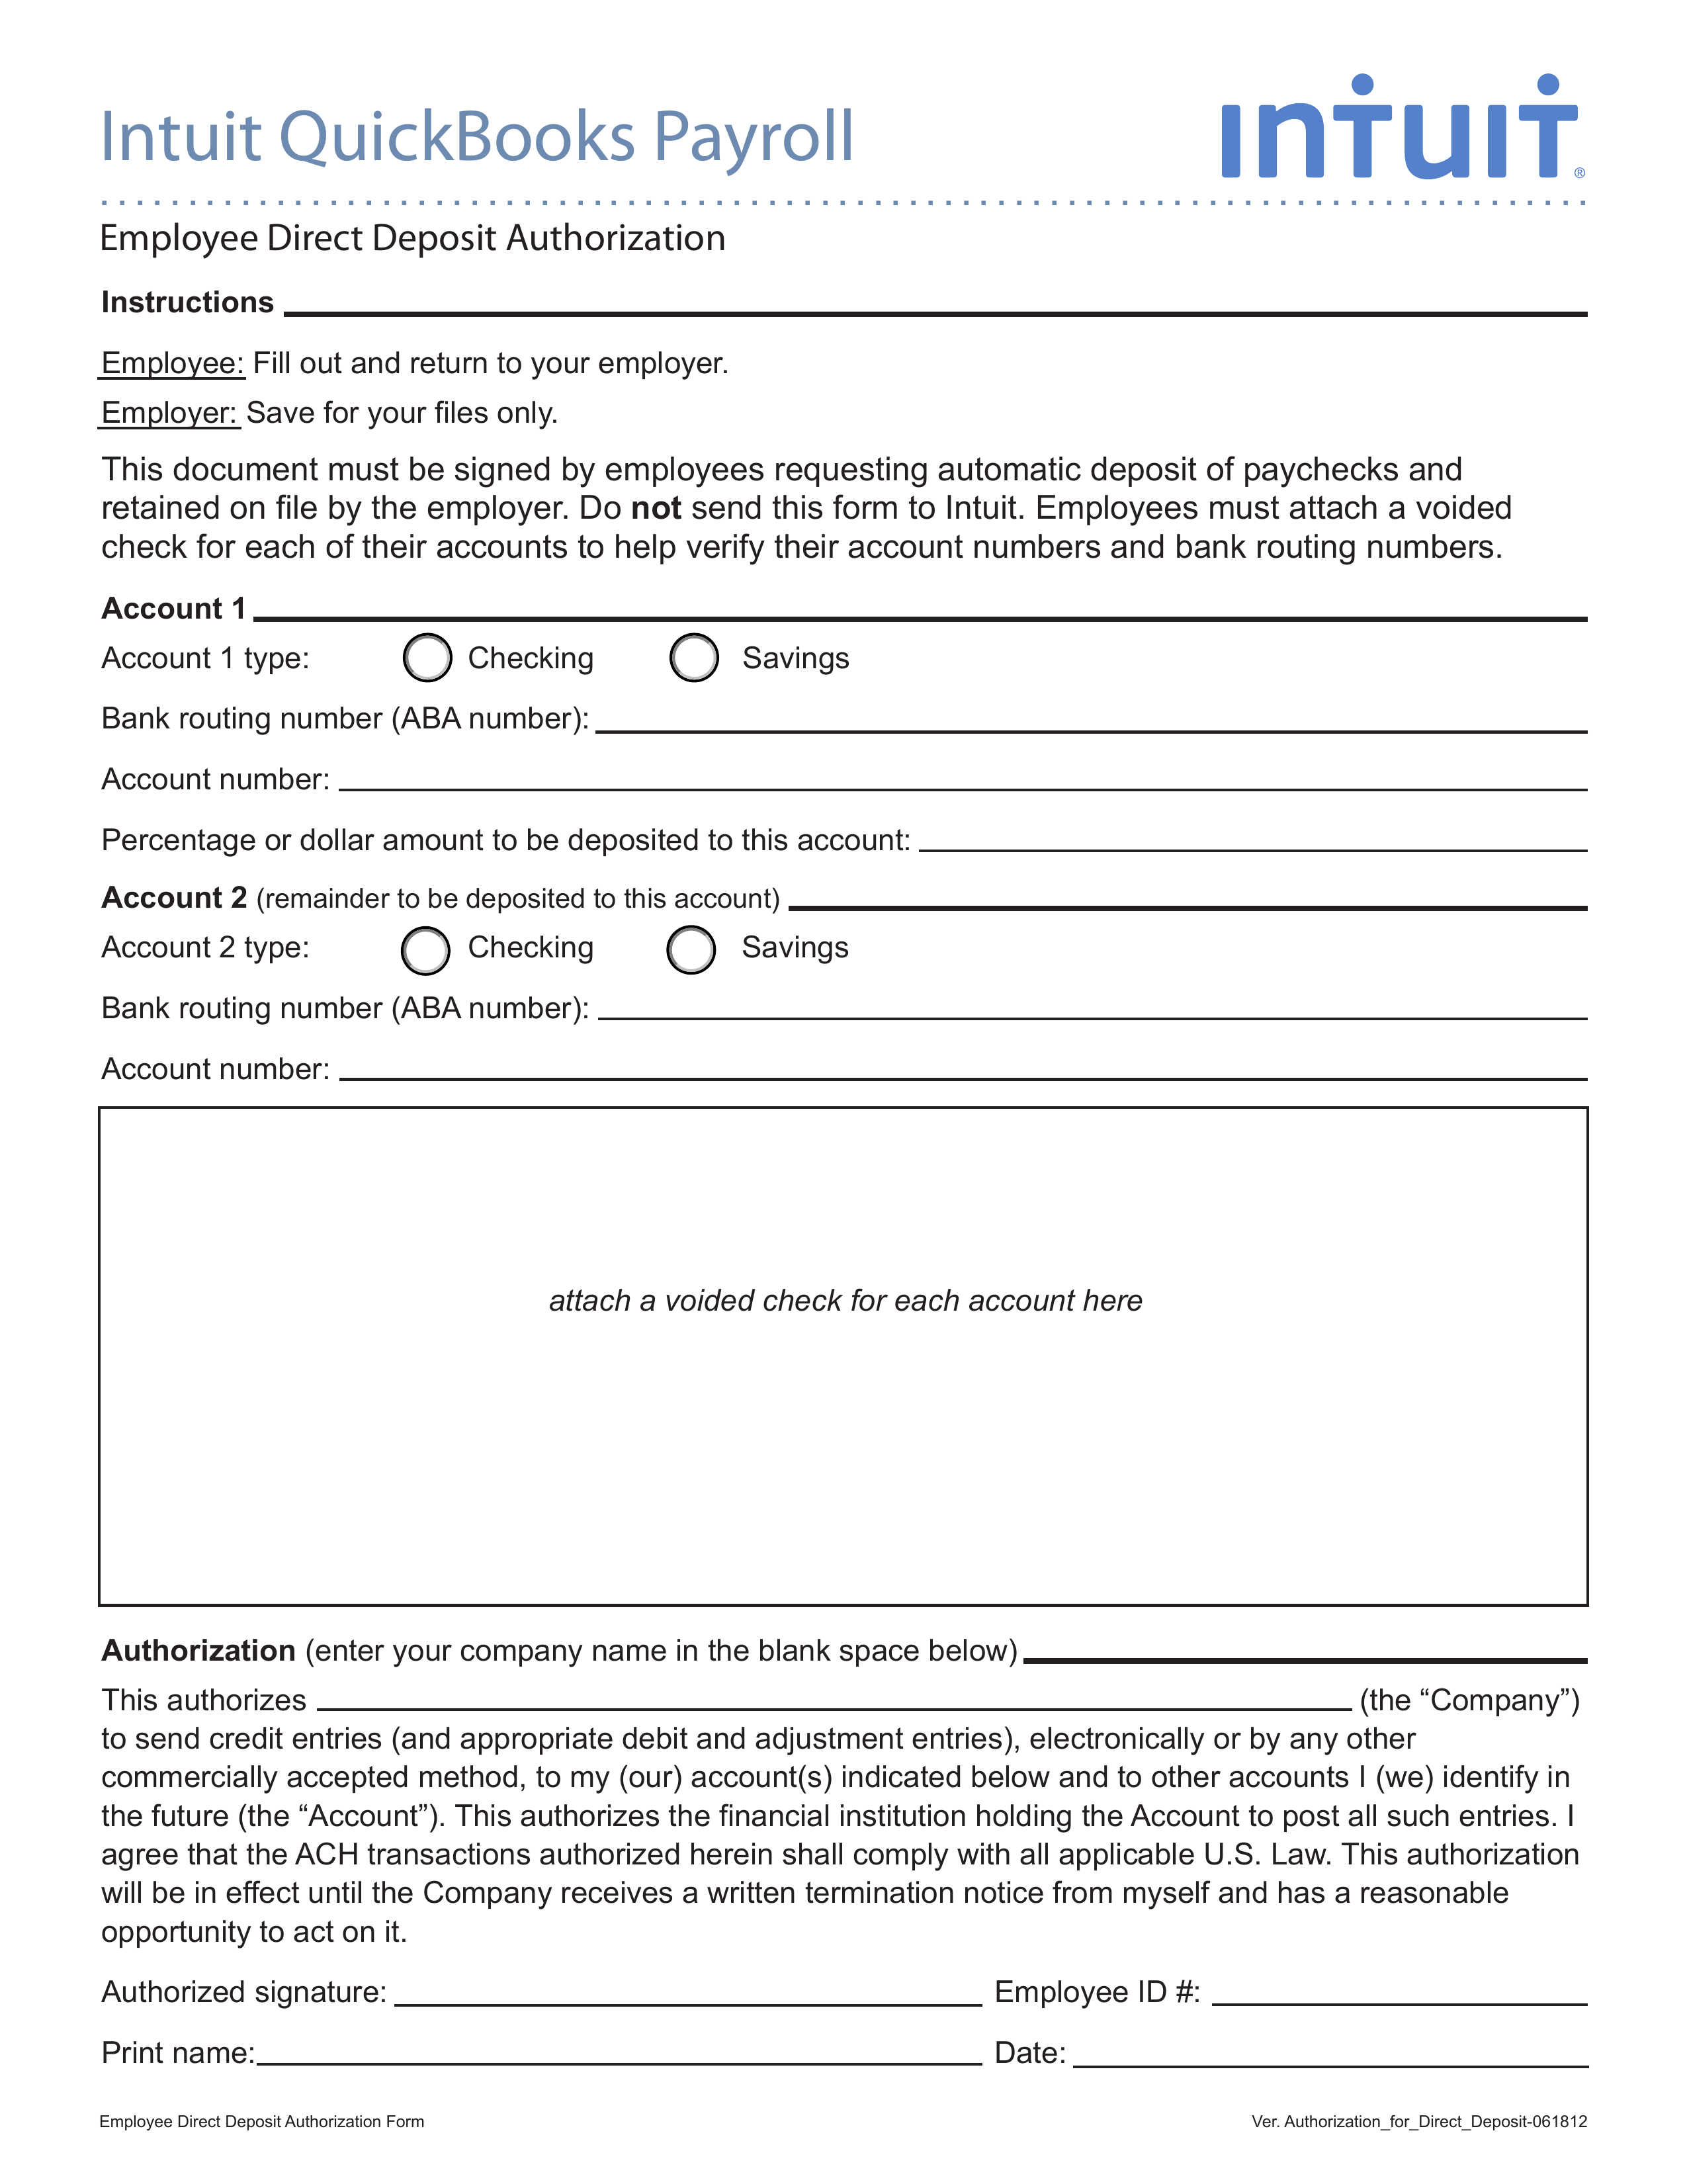 Free Intuit/Quickbooks Payroll Direct Deposit Form - PDF – eForms Throughout Generic Direct Deposit Form Template Regarding Generic Direct Deposit Form Template